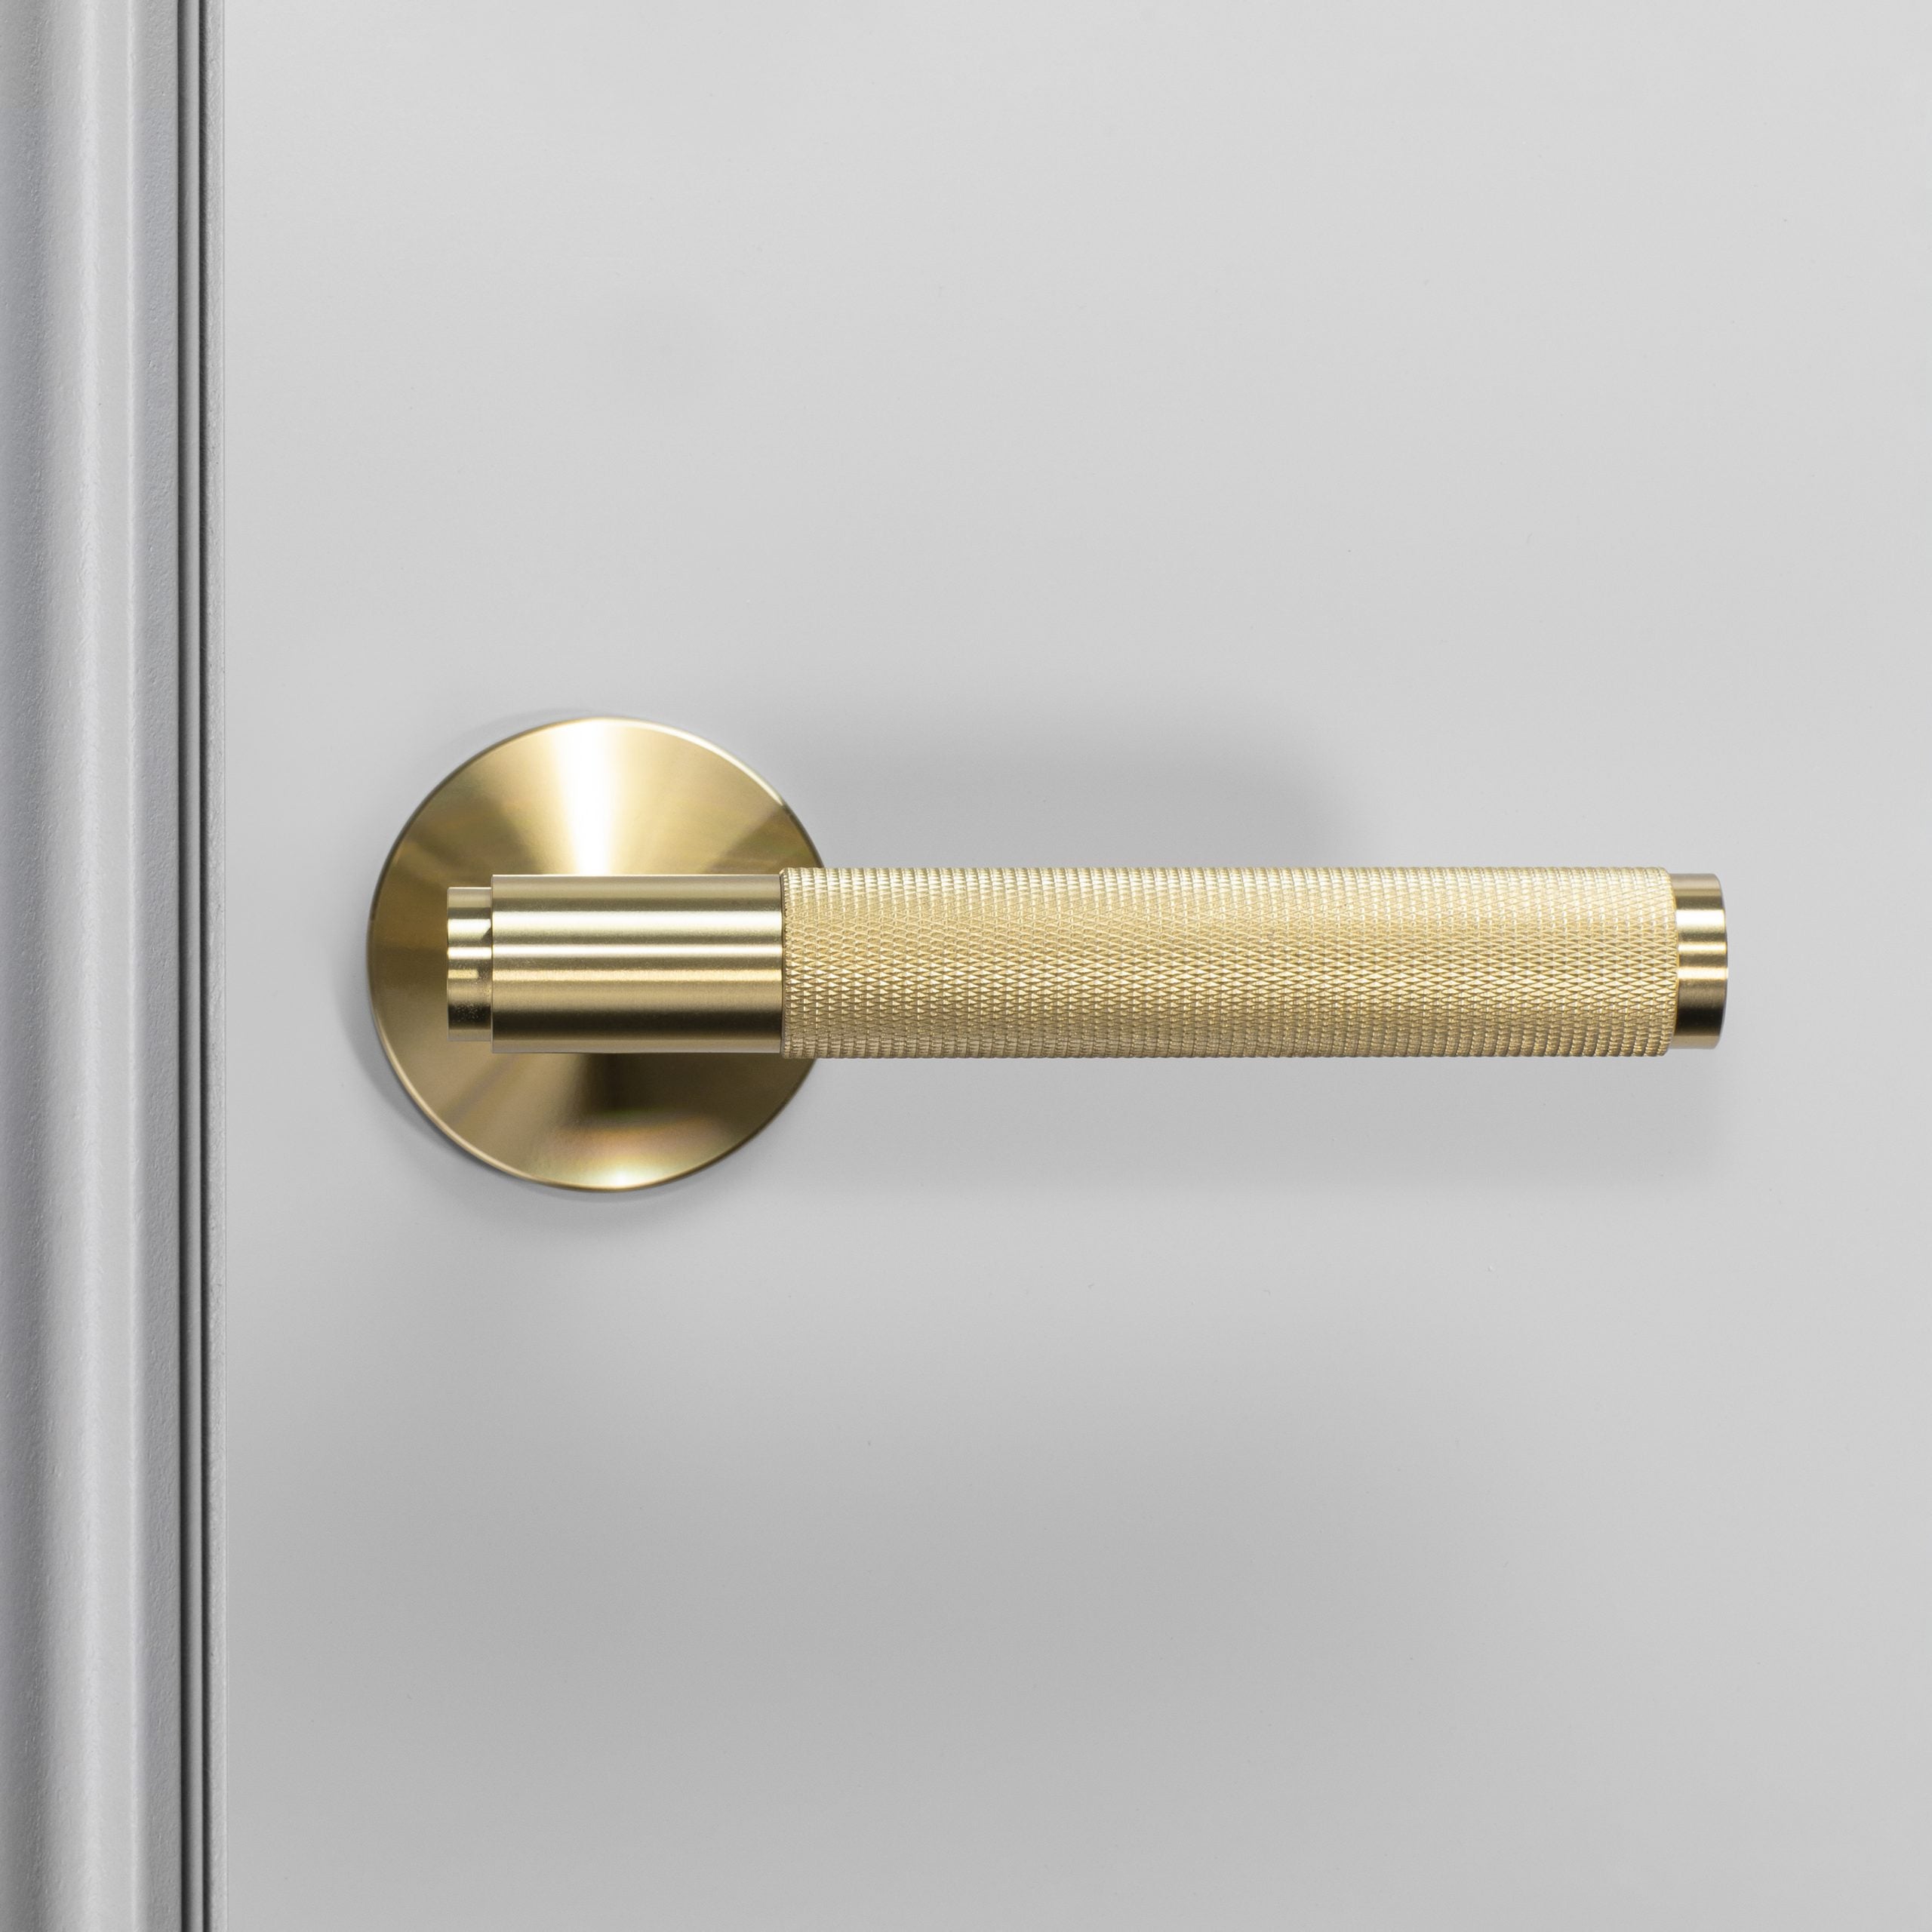 Buster + Punch Conventional Door Handle, Cross Design - FIXED TYPE Hardware Buster + Punch   